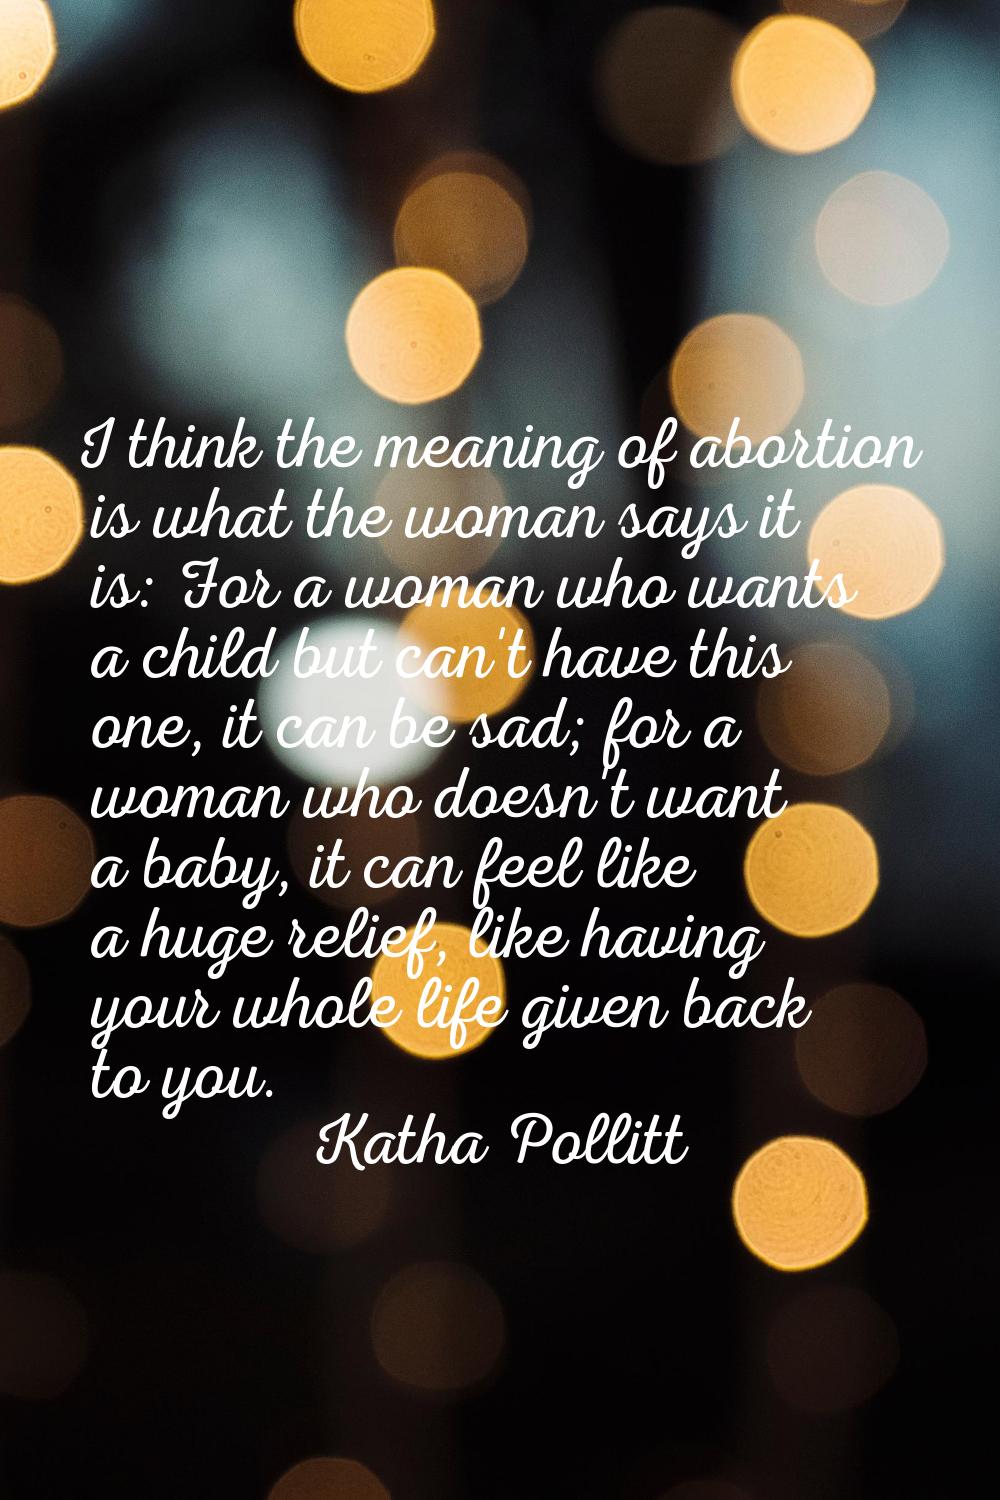 I think the meaning of abortion is what the woman says it is: For a woman who wants a child but can